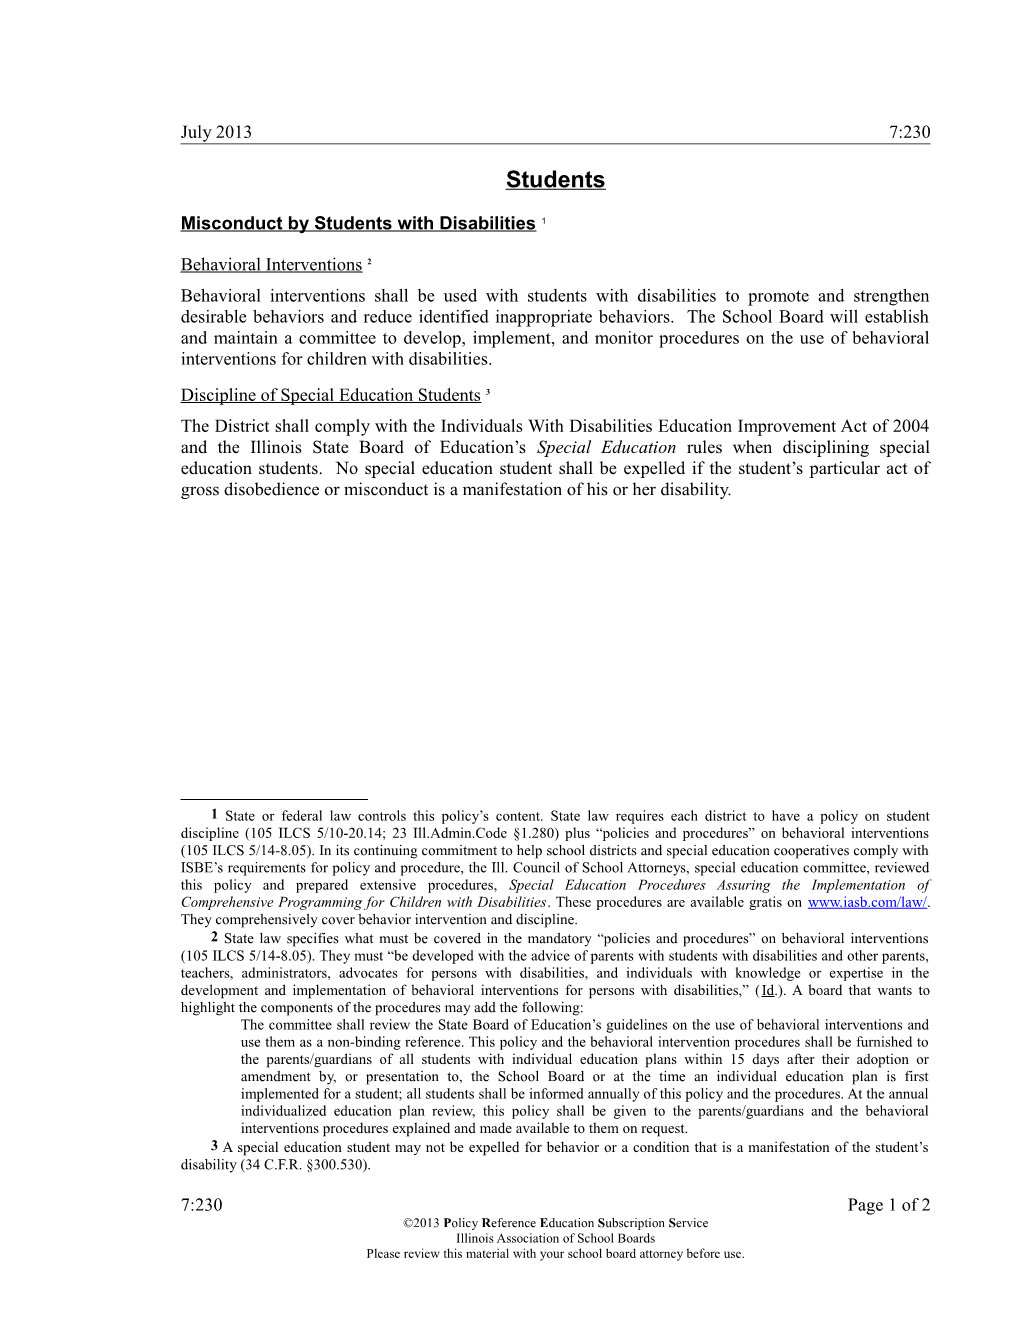 Misconduct by Students with Disabilities 1